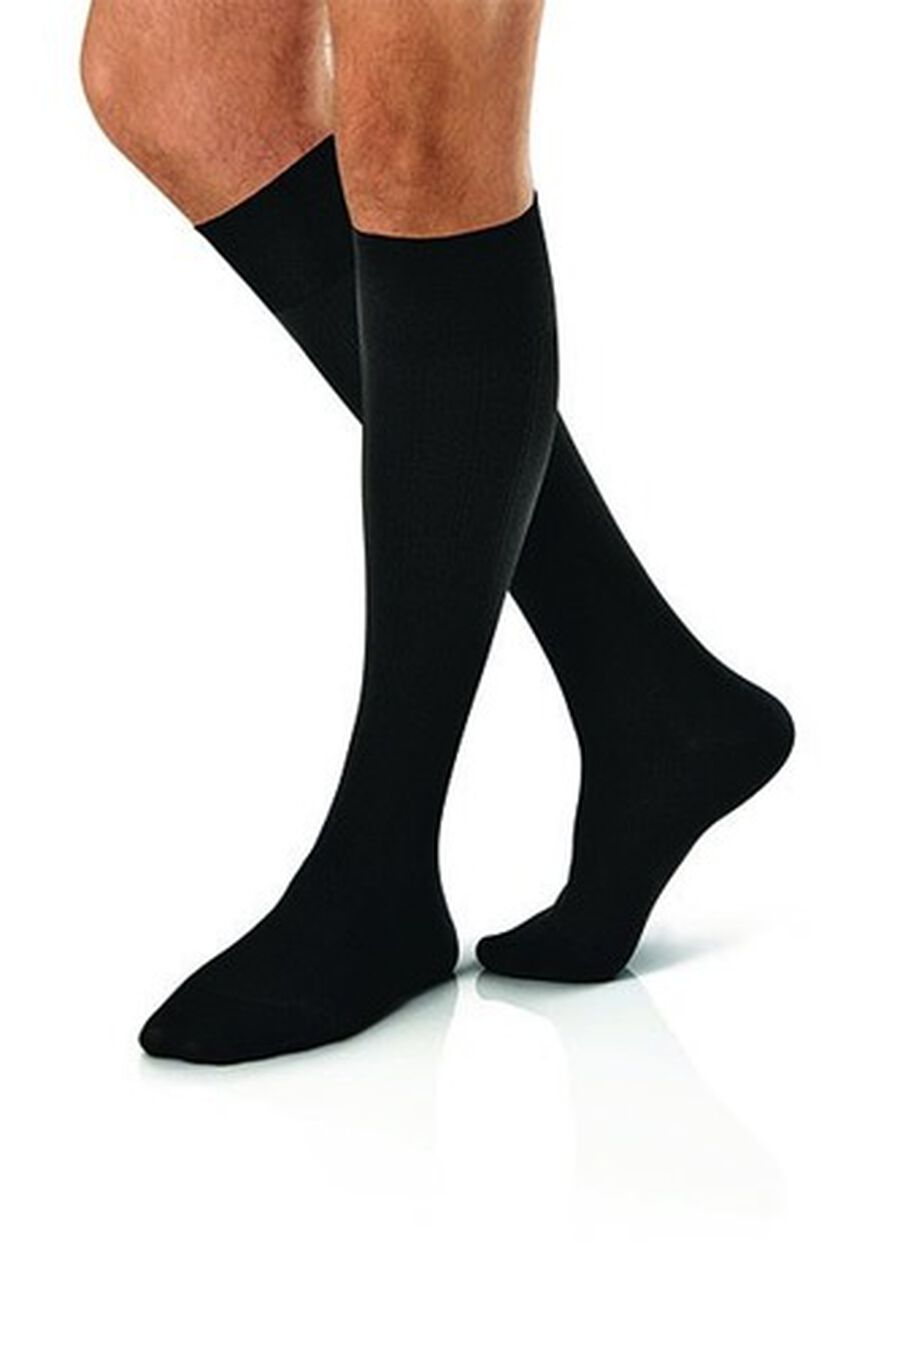 BSN Jobst Men's Knee-High Ribbed Extra Firm Compression Socks, Closed Toe, Large, Black, , large image number 2